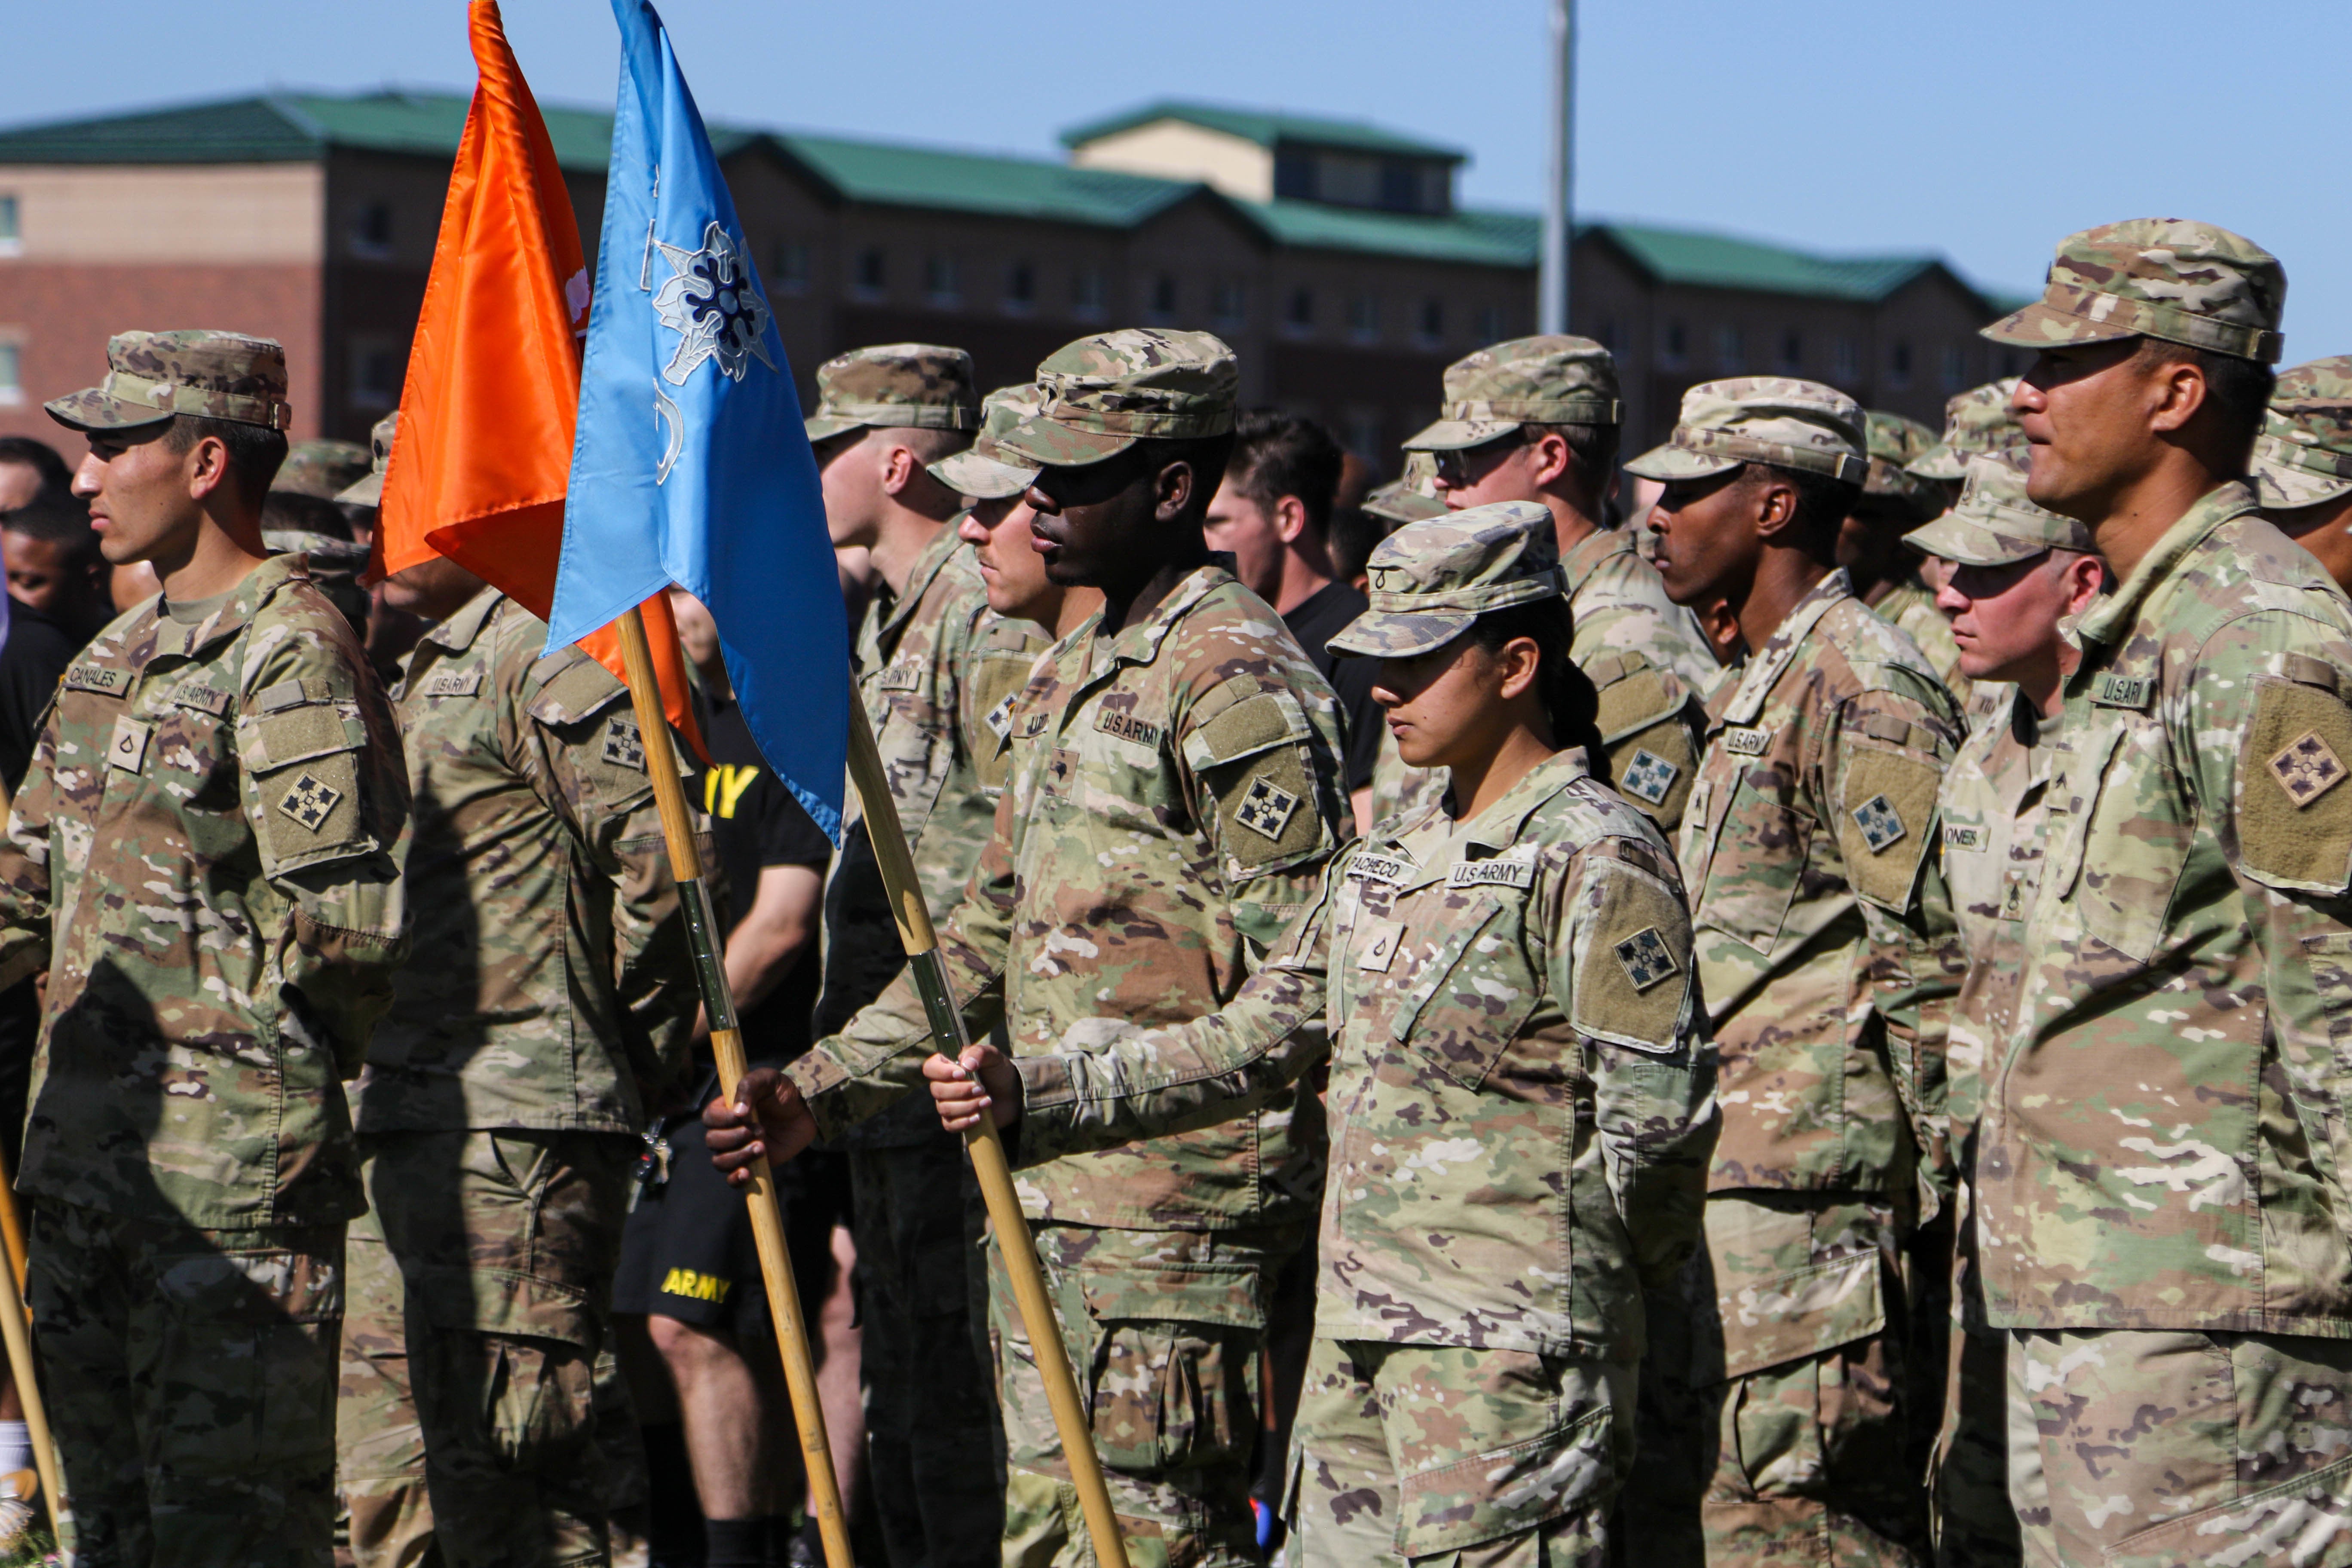 A new RAND Corporation report found that minority officers stay in the Army longer but receive fewer promotions. U.S. Army photo by Maj. Jason Elmore.